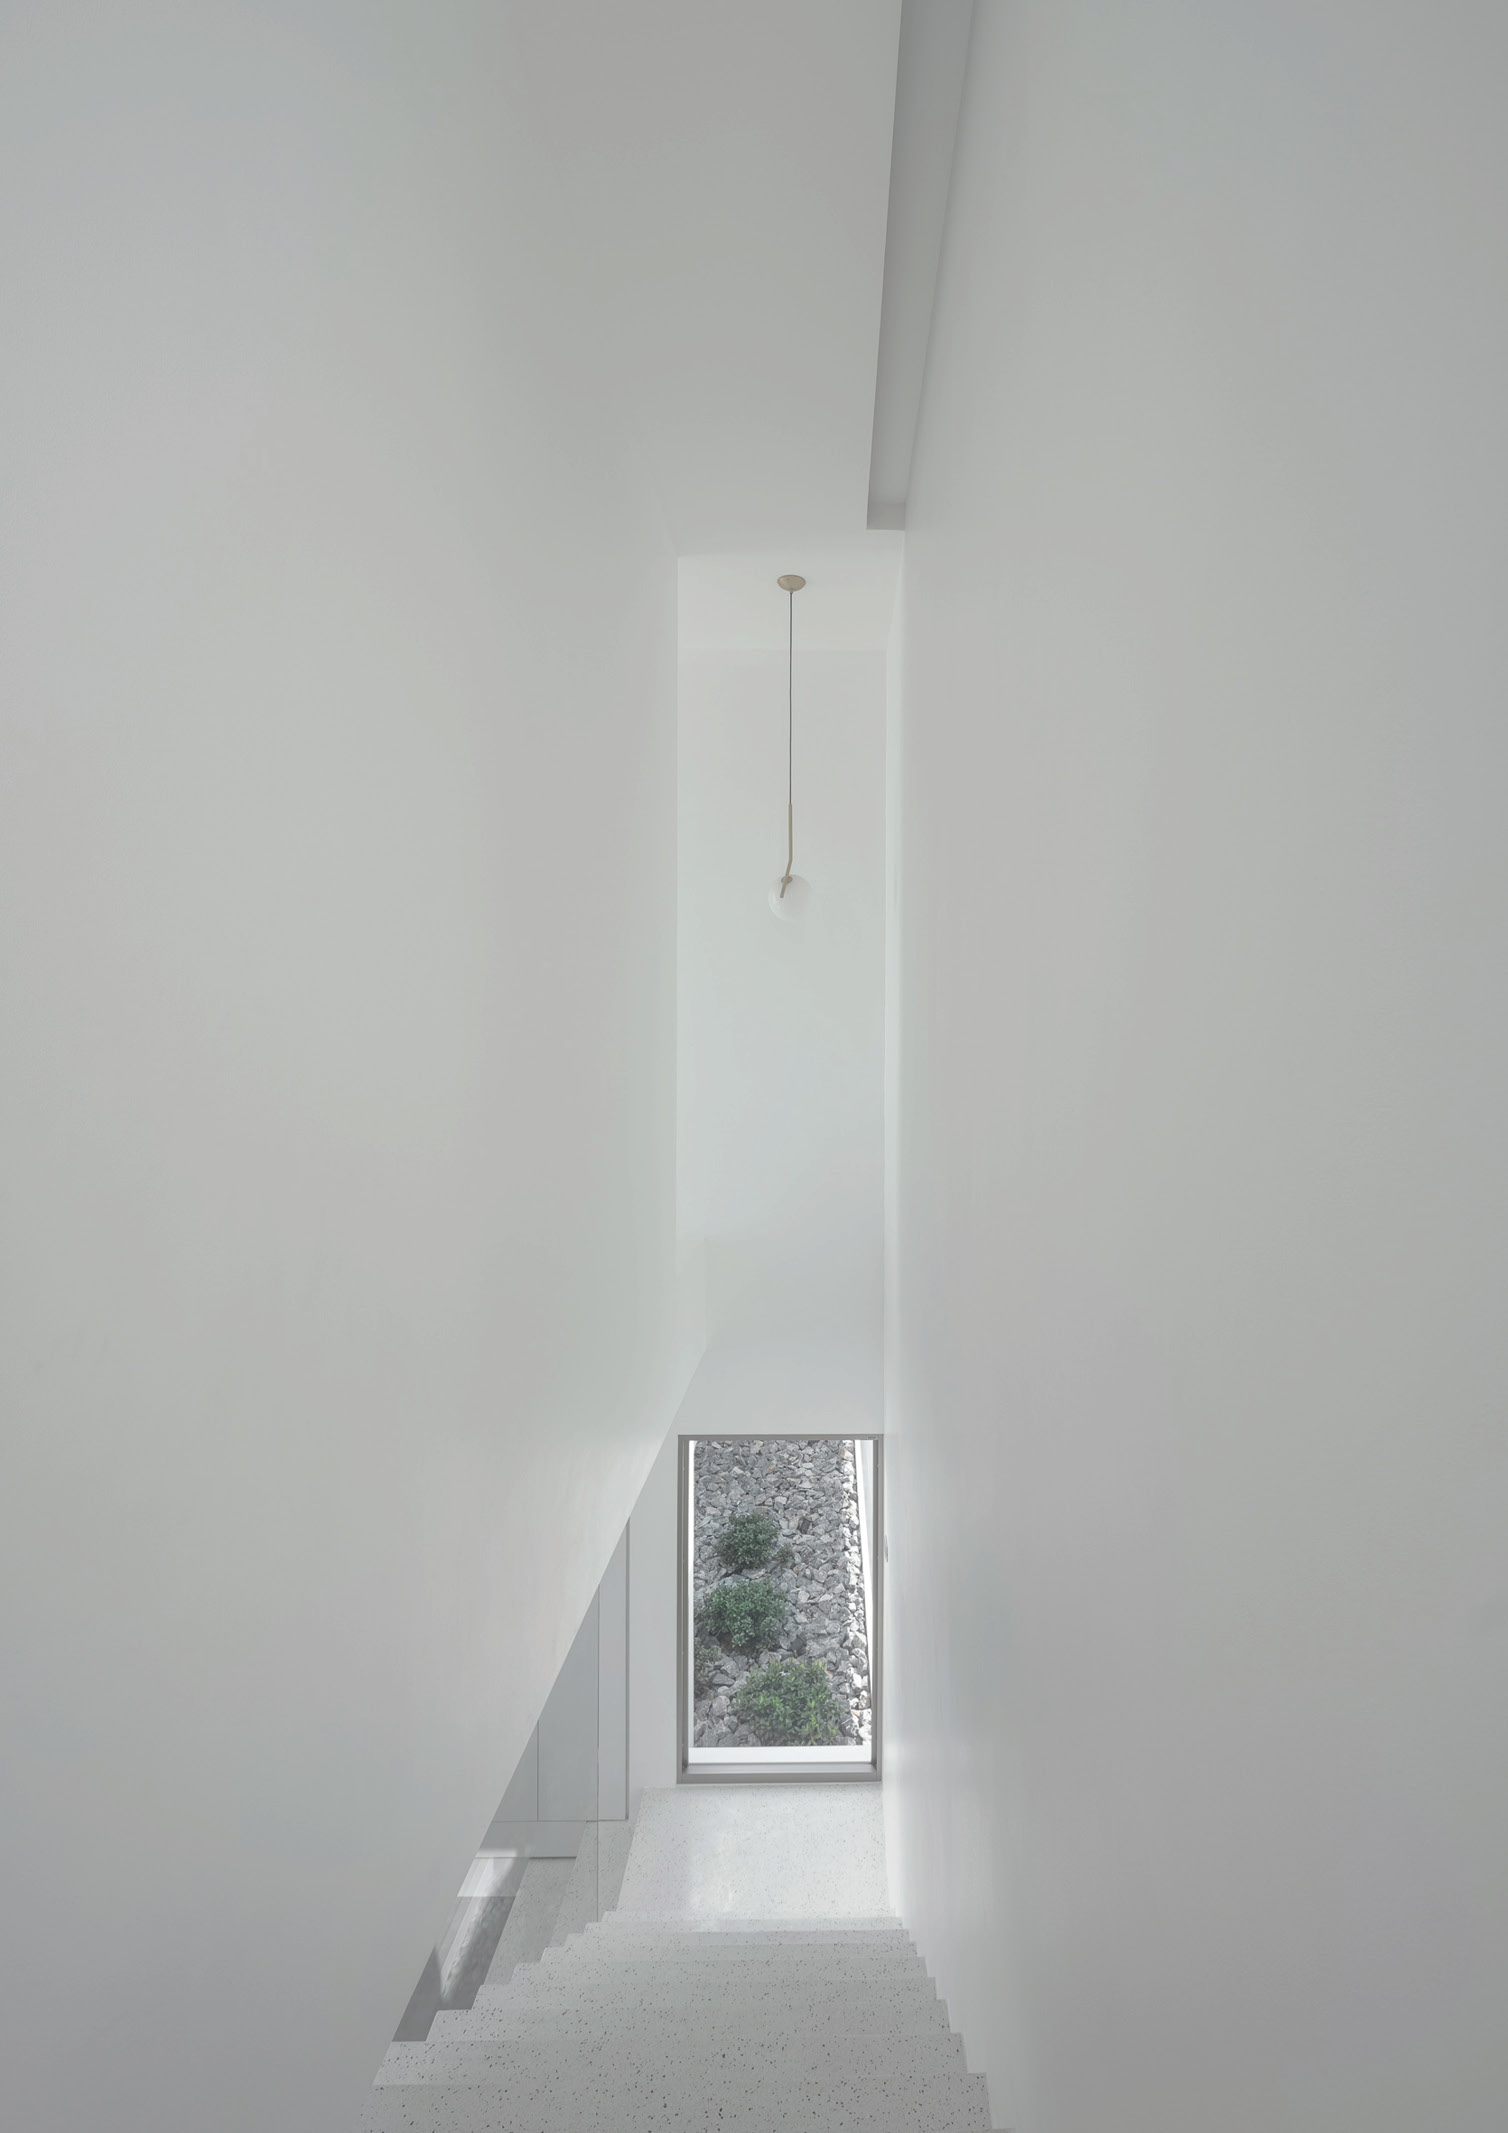 An all white stair well with a narrow window at the end.